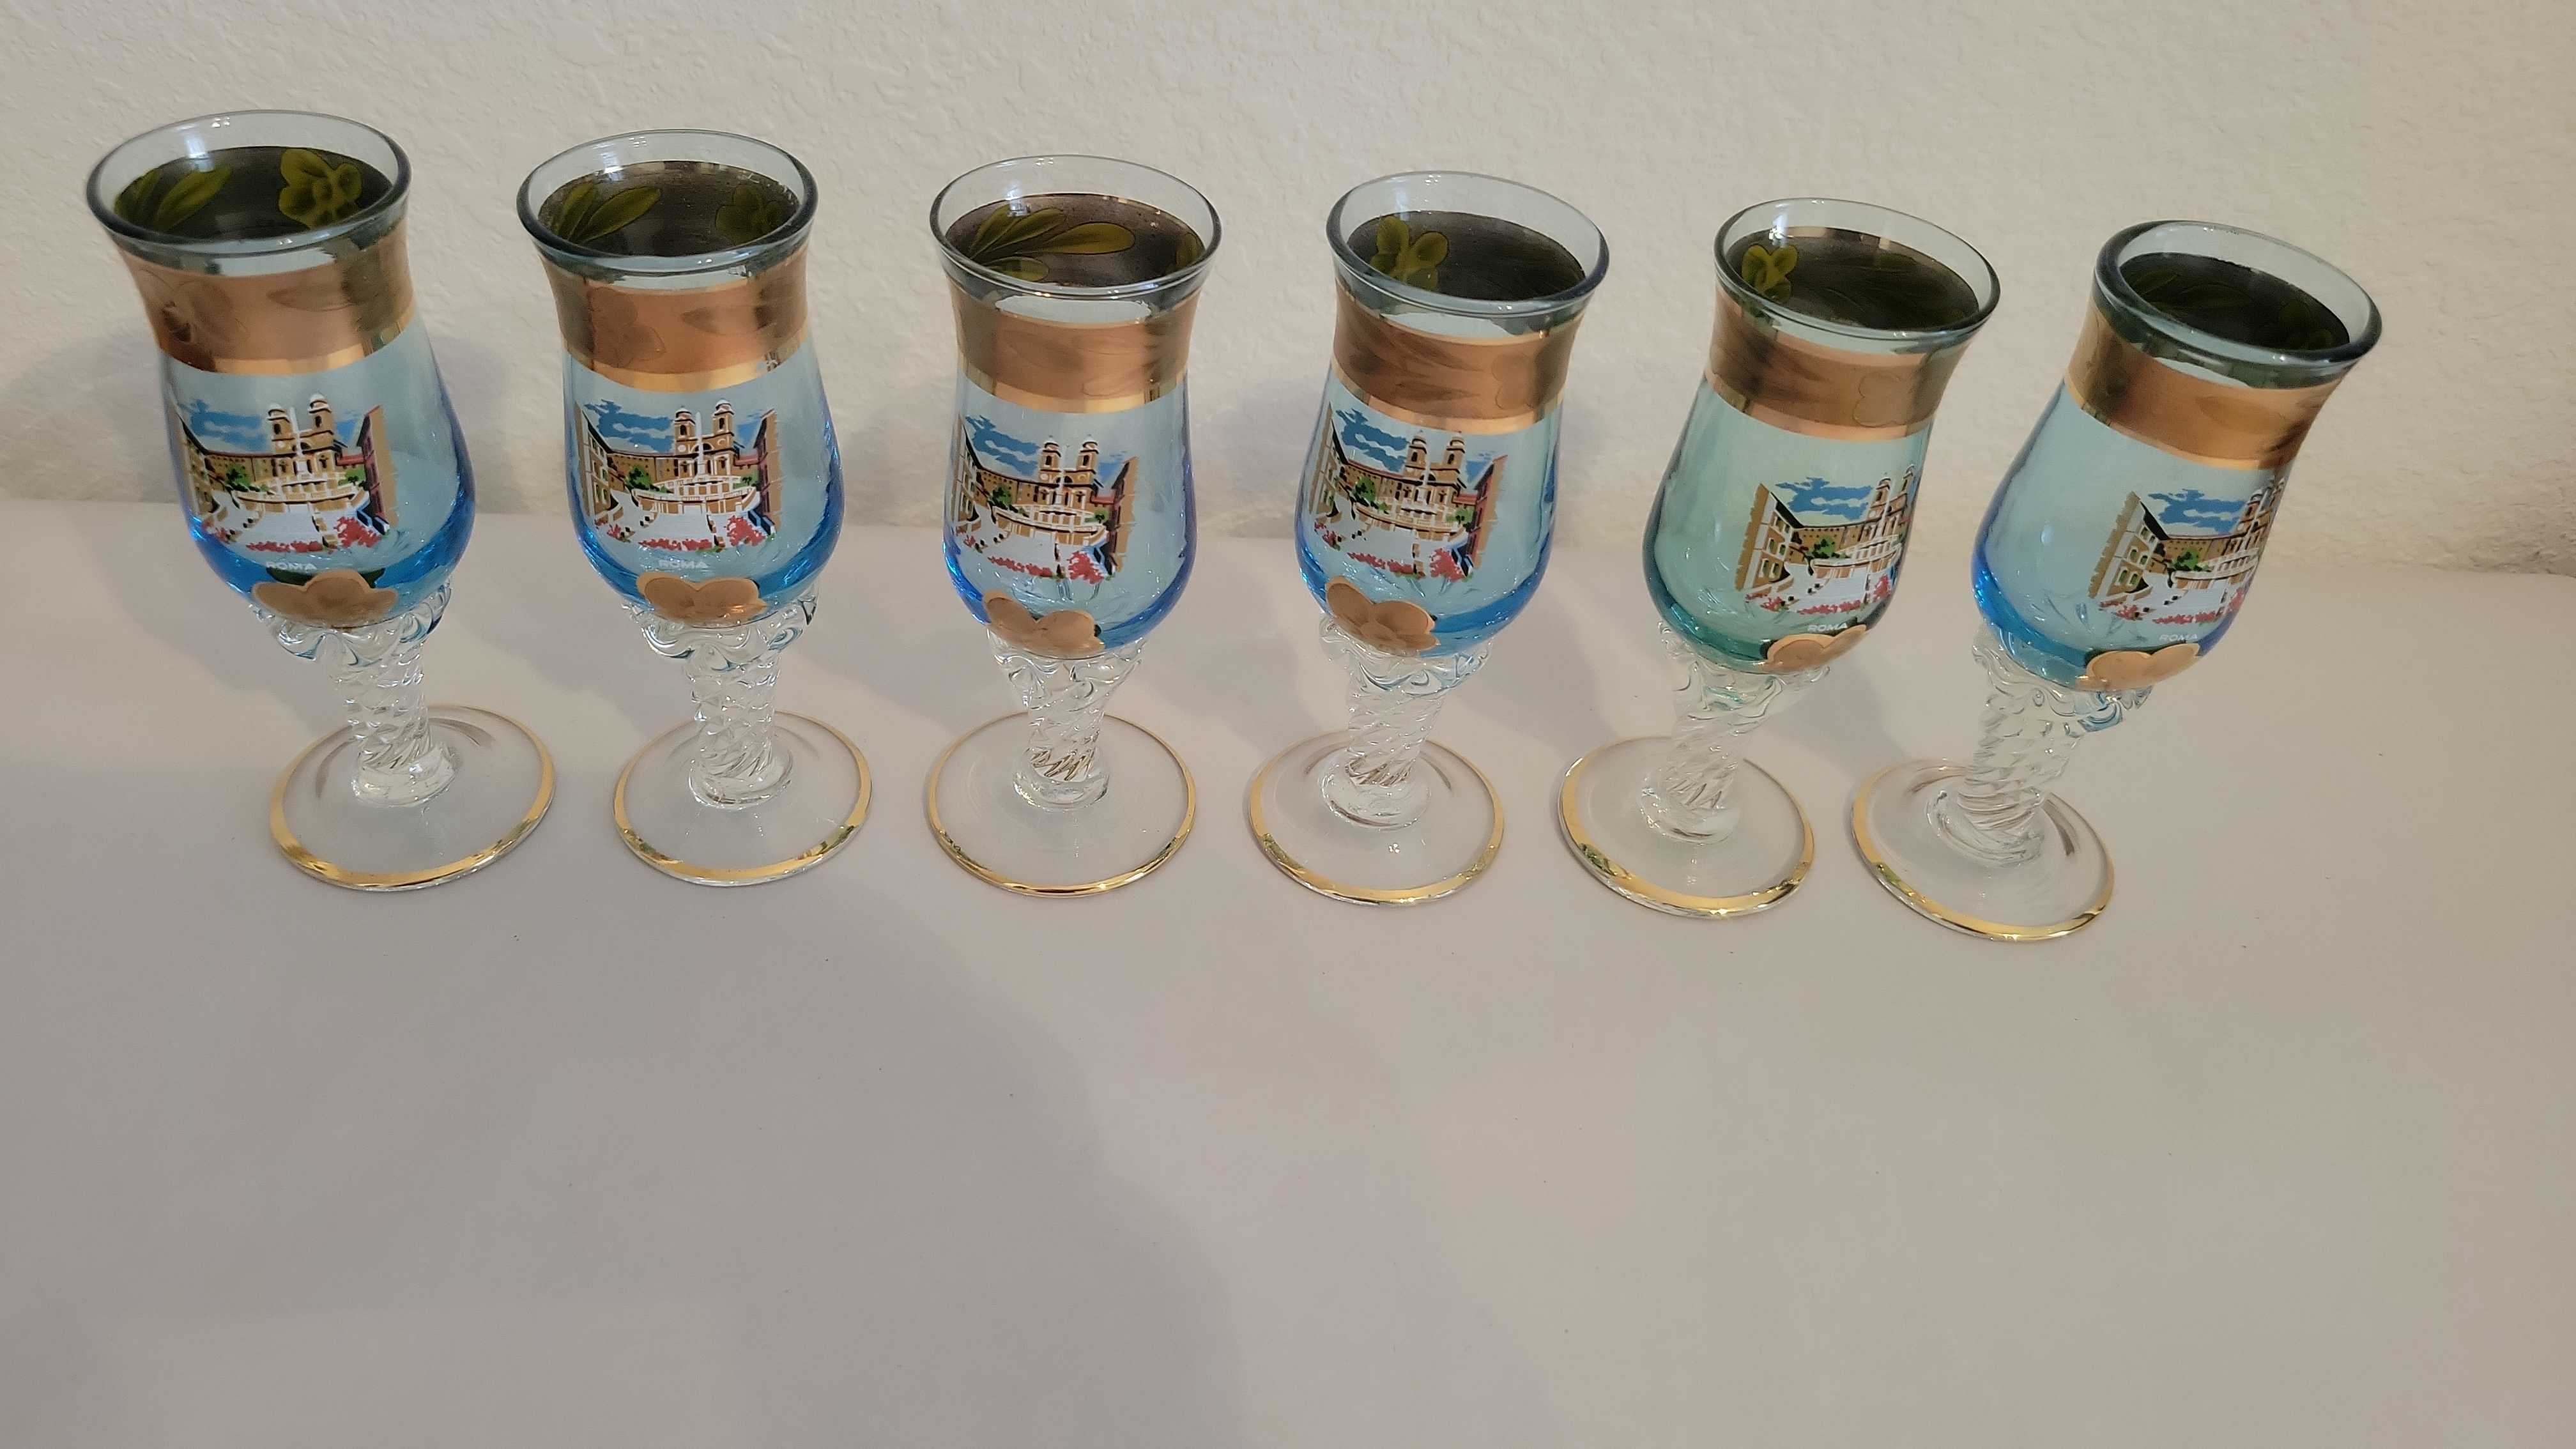 Vintage Large Wild Bird Series Tall Drinking Glasses, Water Glasses, Barware  Glasses, Cabinet Decor, Collectible Glassware-set of Six 